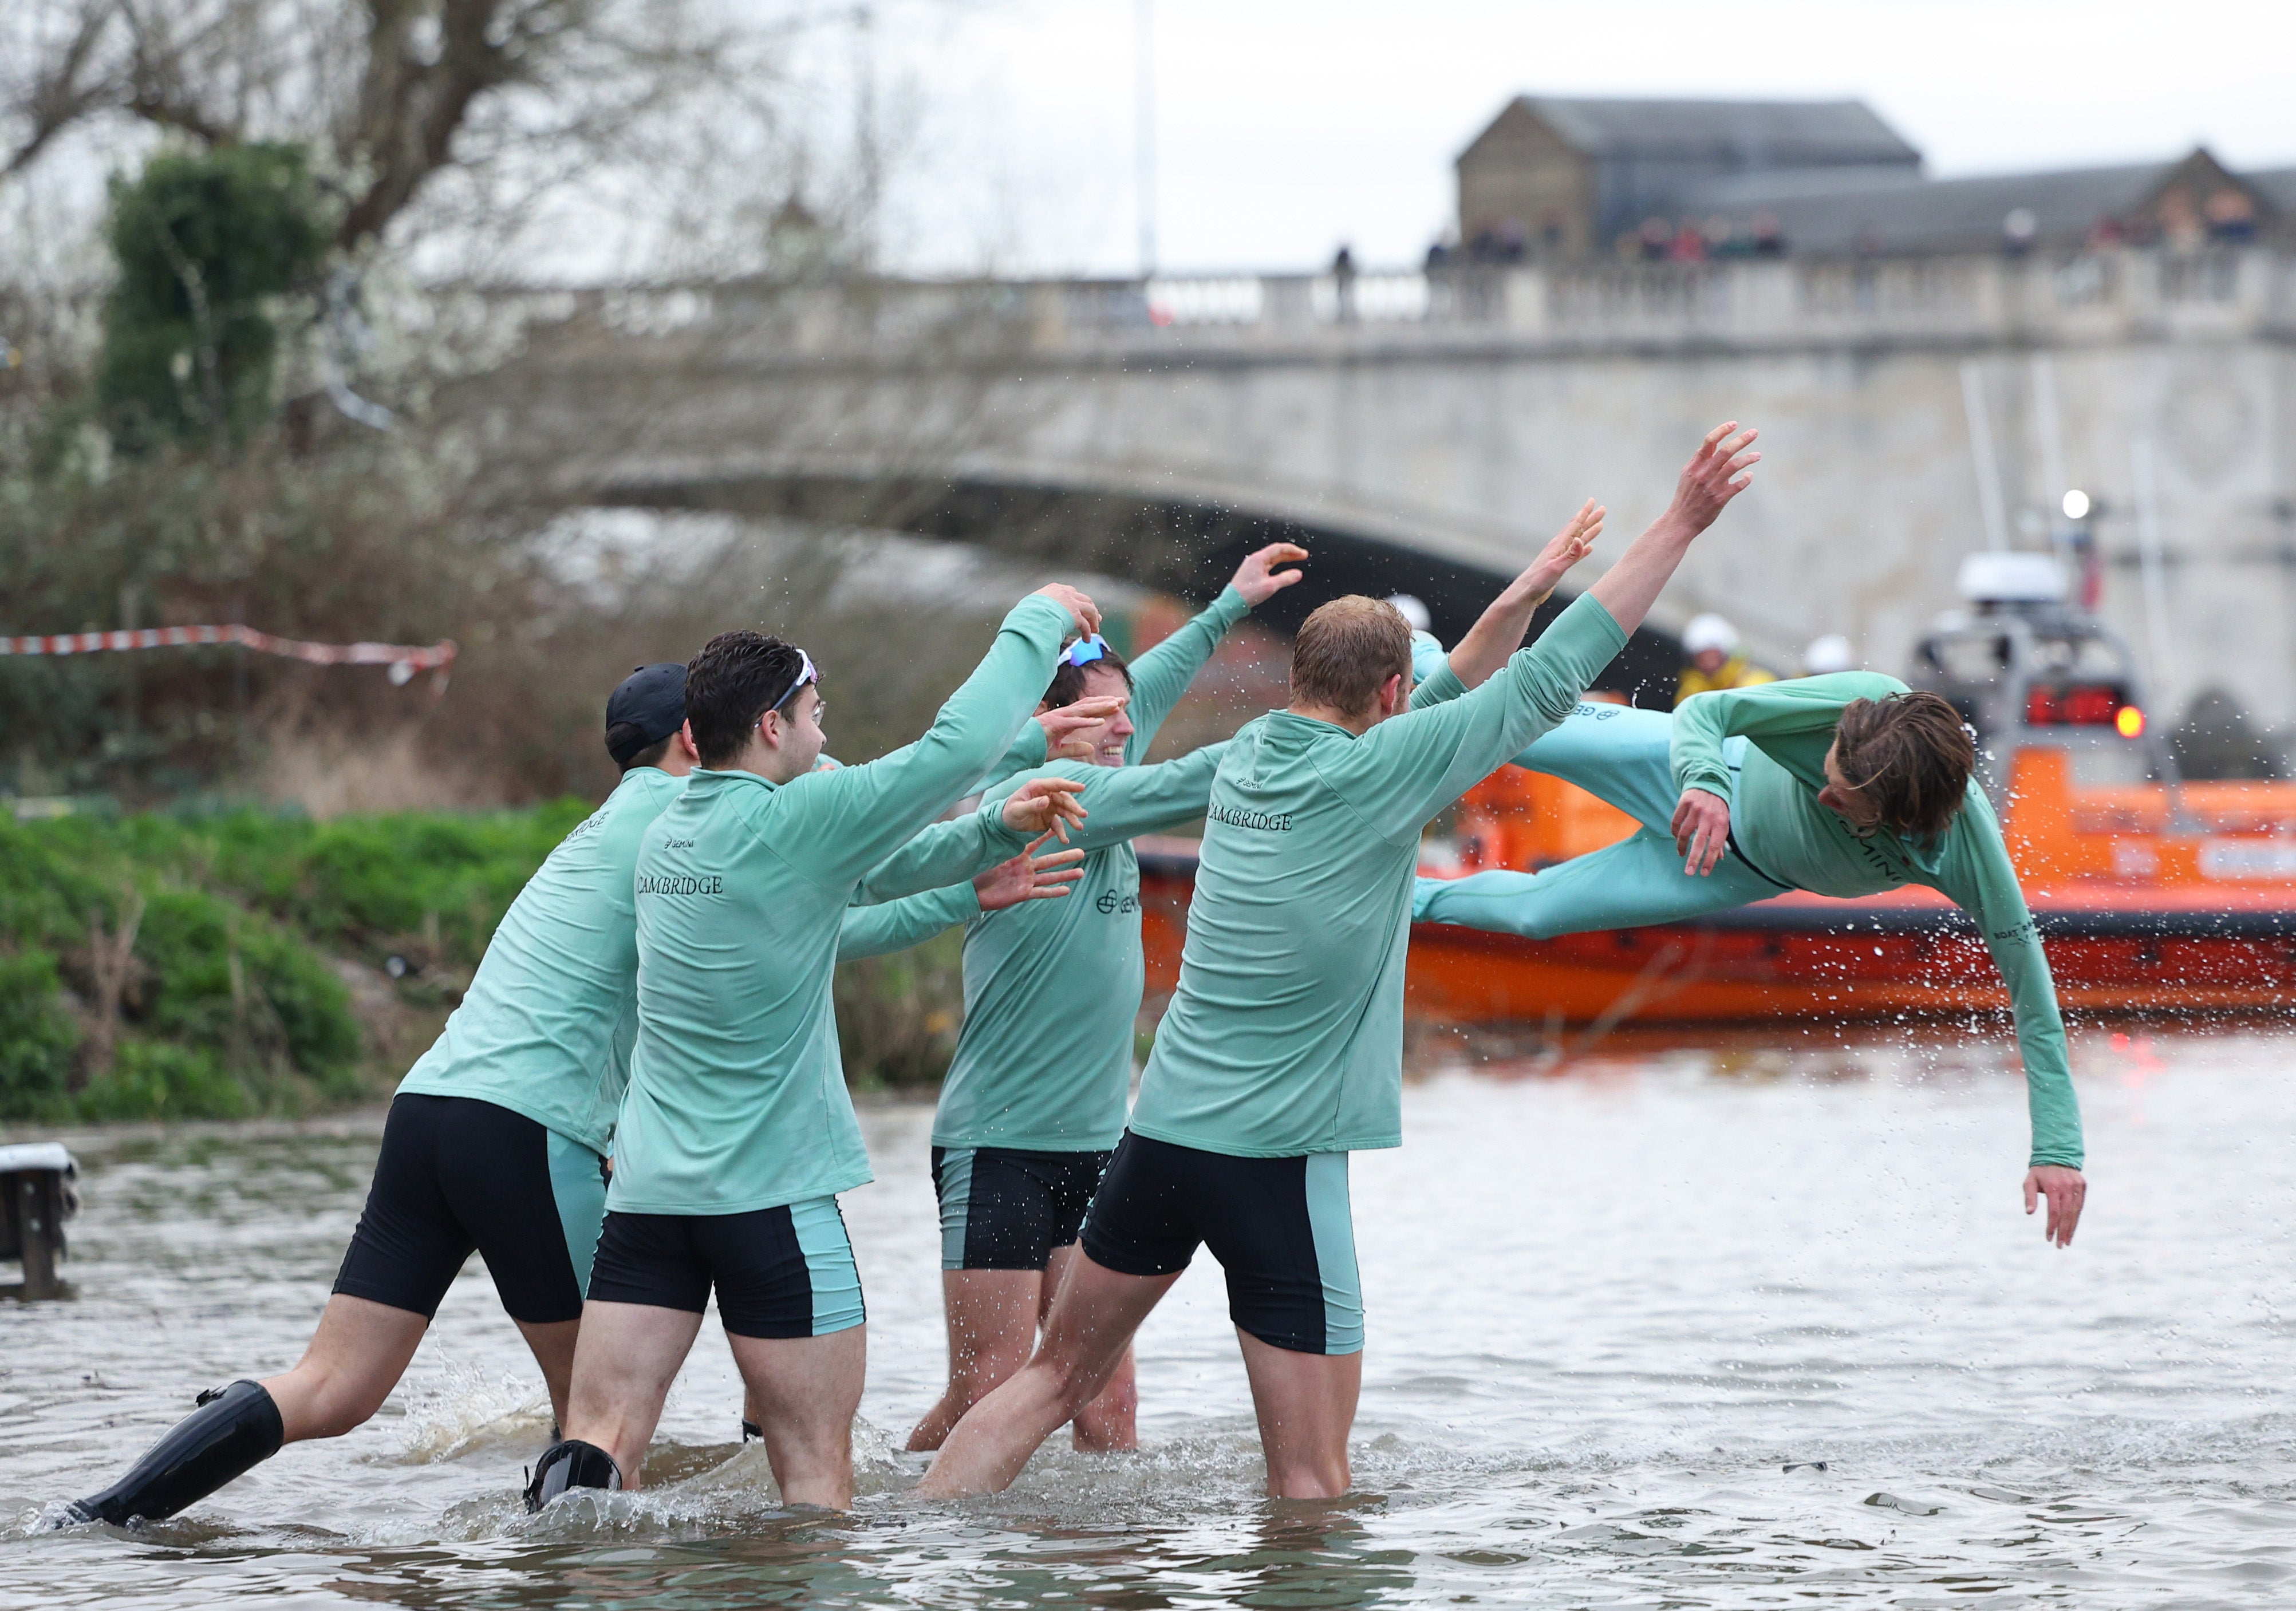 Cox Jasper Parish of Cambridge University Boat Club is thrown into the Thames by teammates